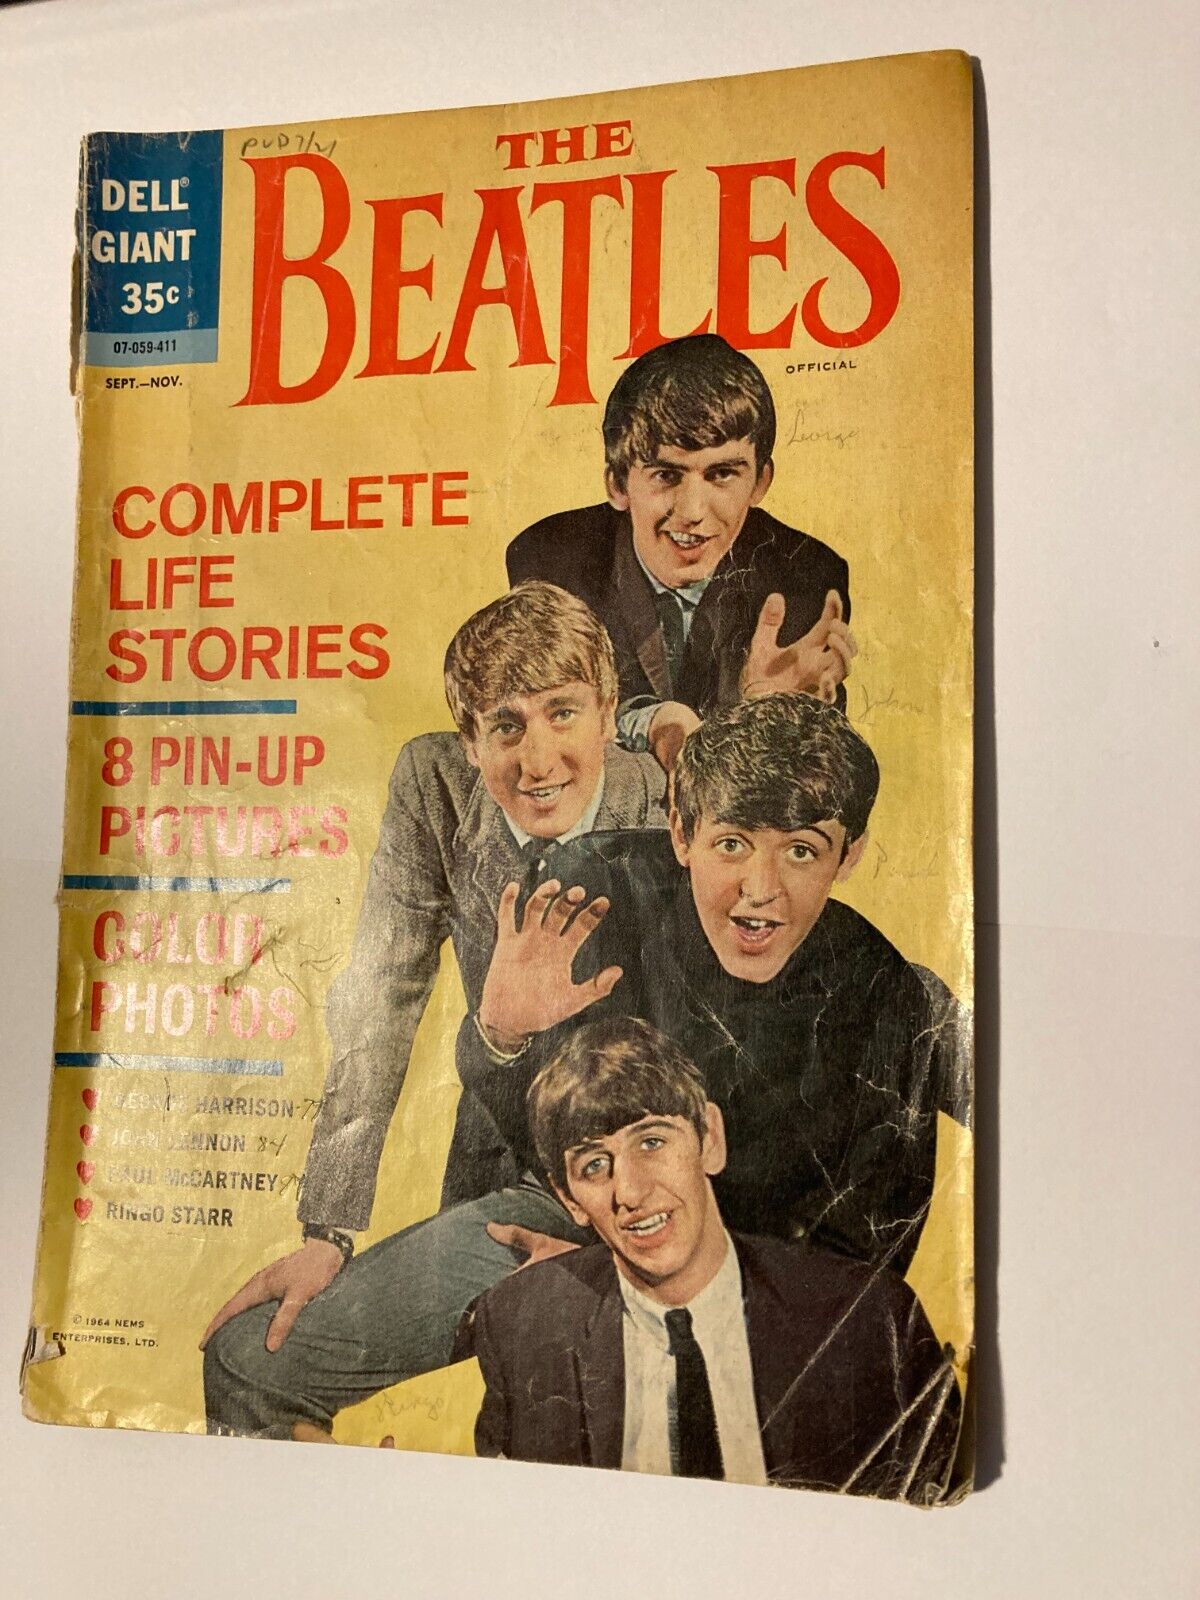 BeatlesLife story (Dell) 1964 Pin Up Pictues insideOriginal Owner